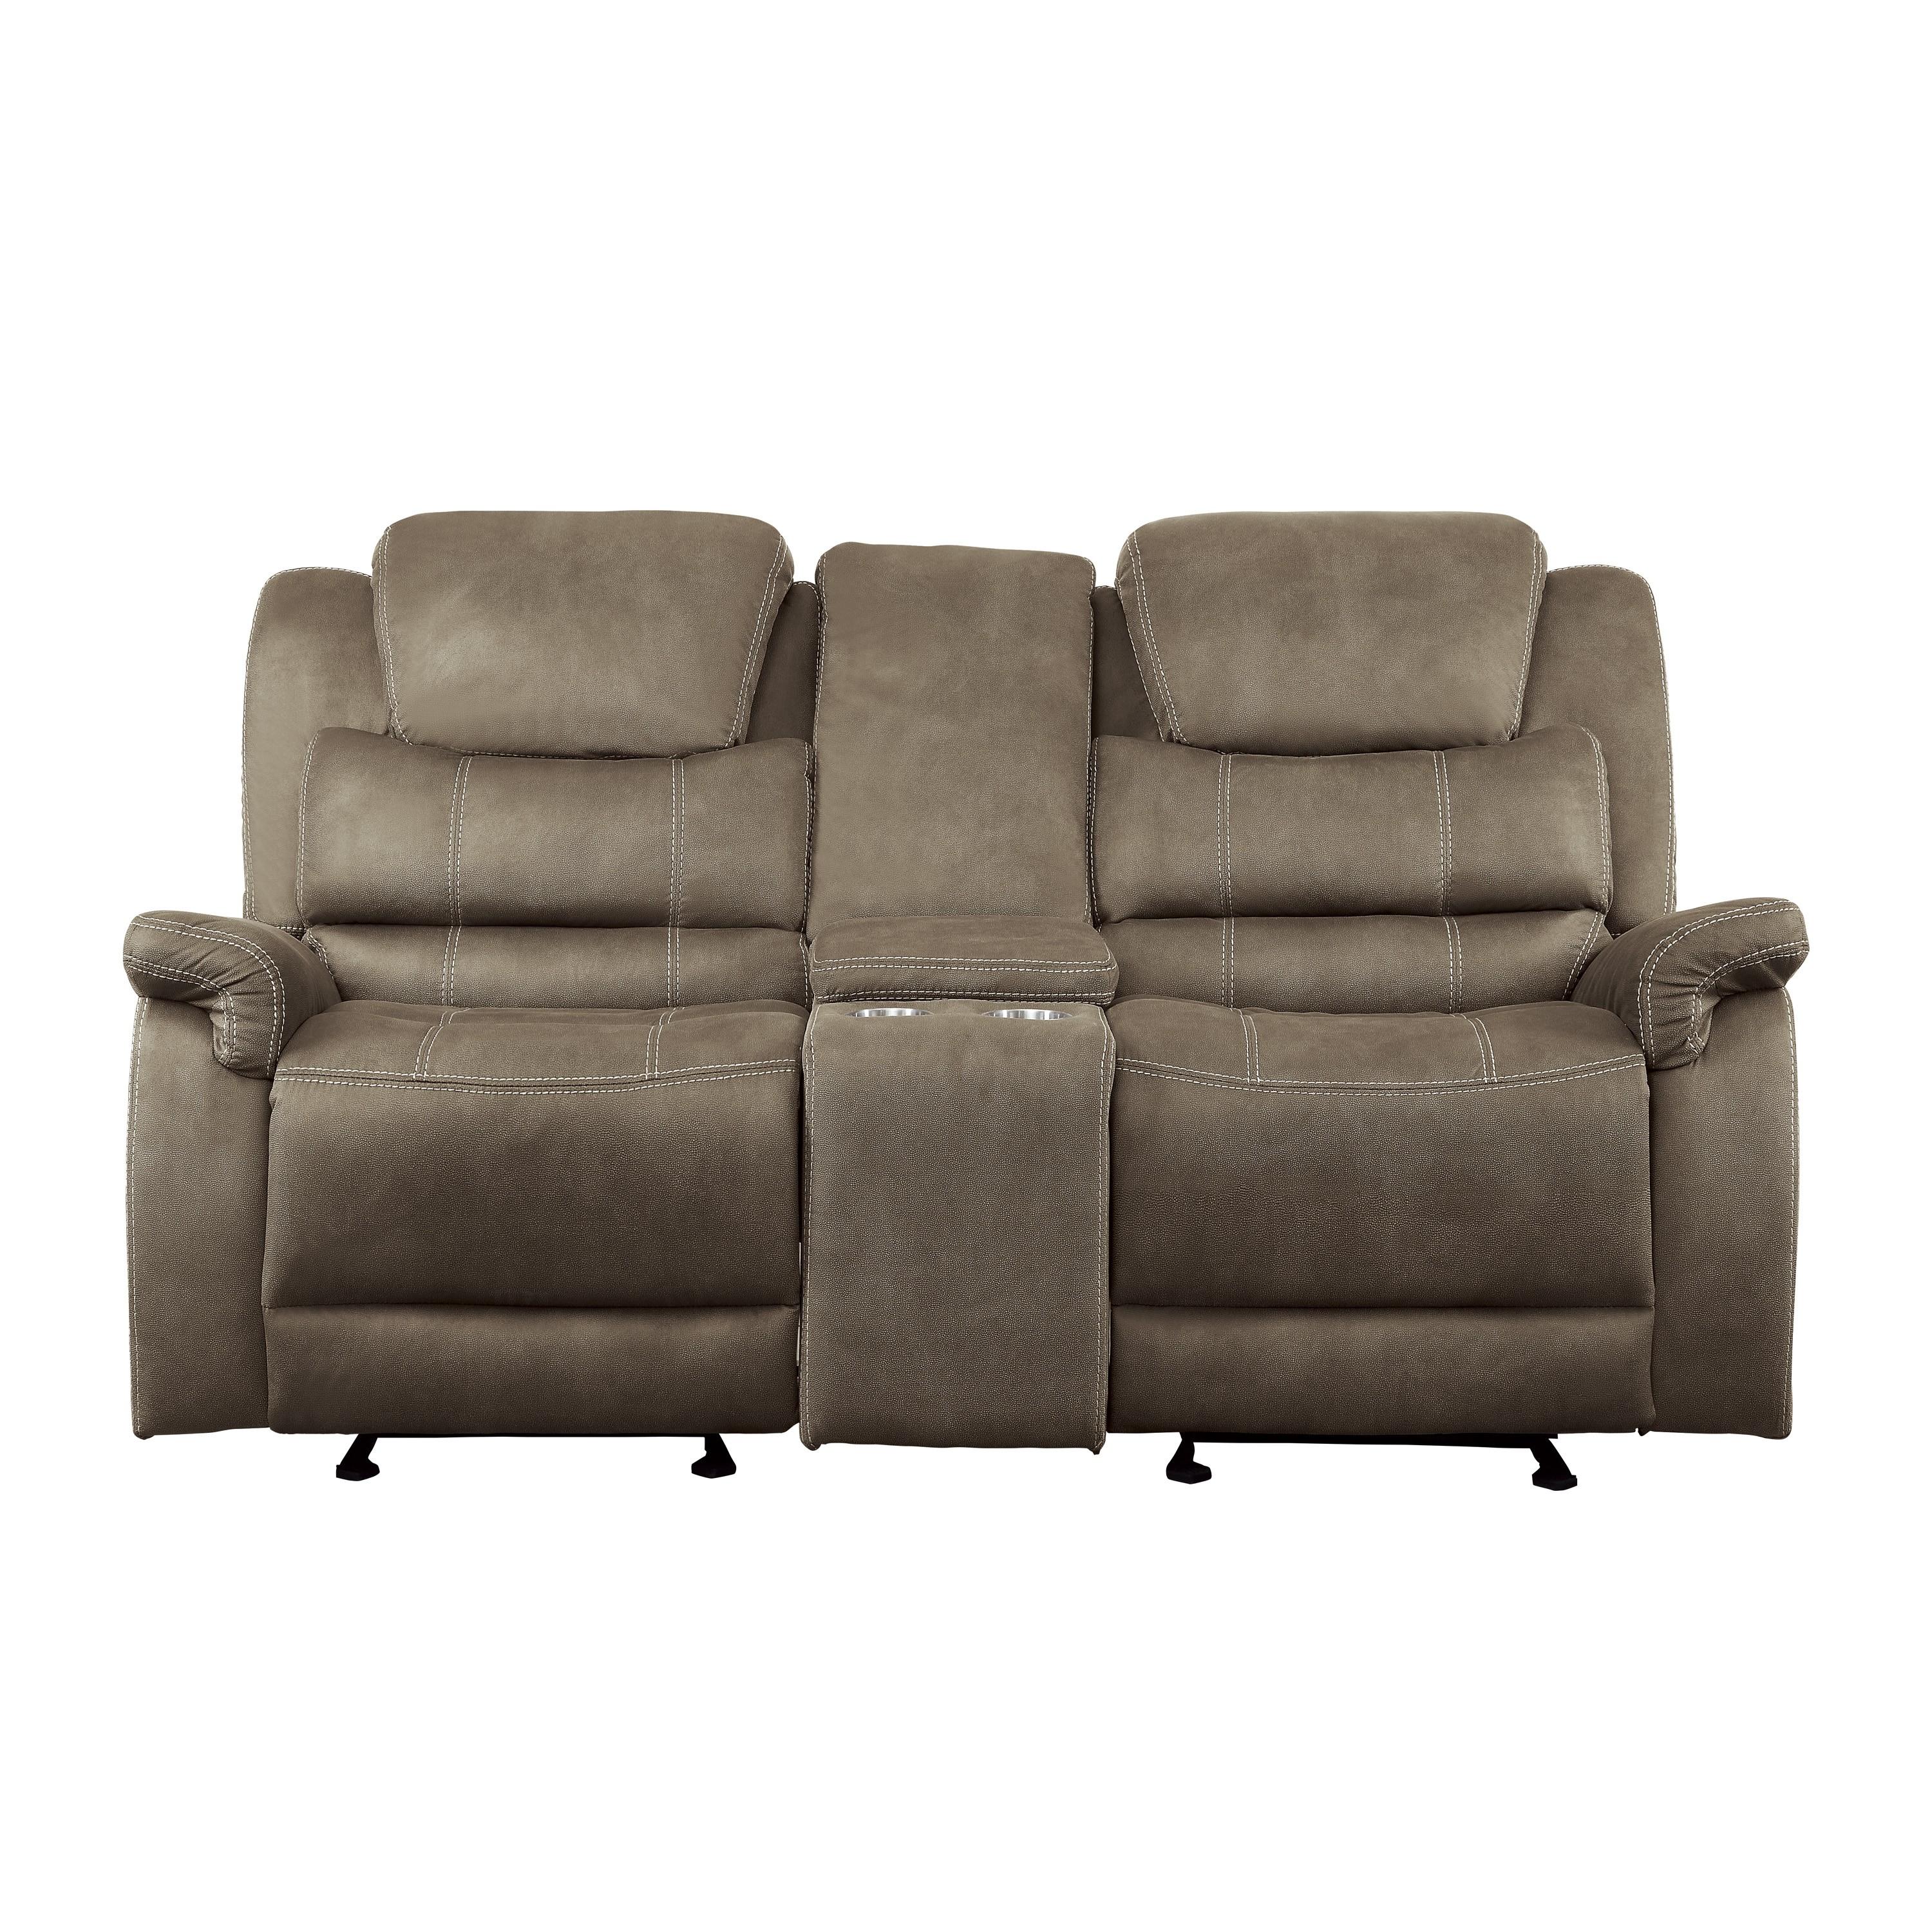 Transitional Reclining Loveseat 9848BR-2 Shola 9848BR-2 in Brown Microfiber